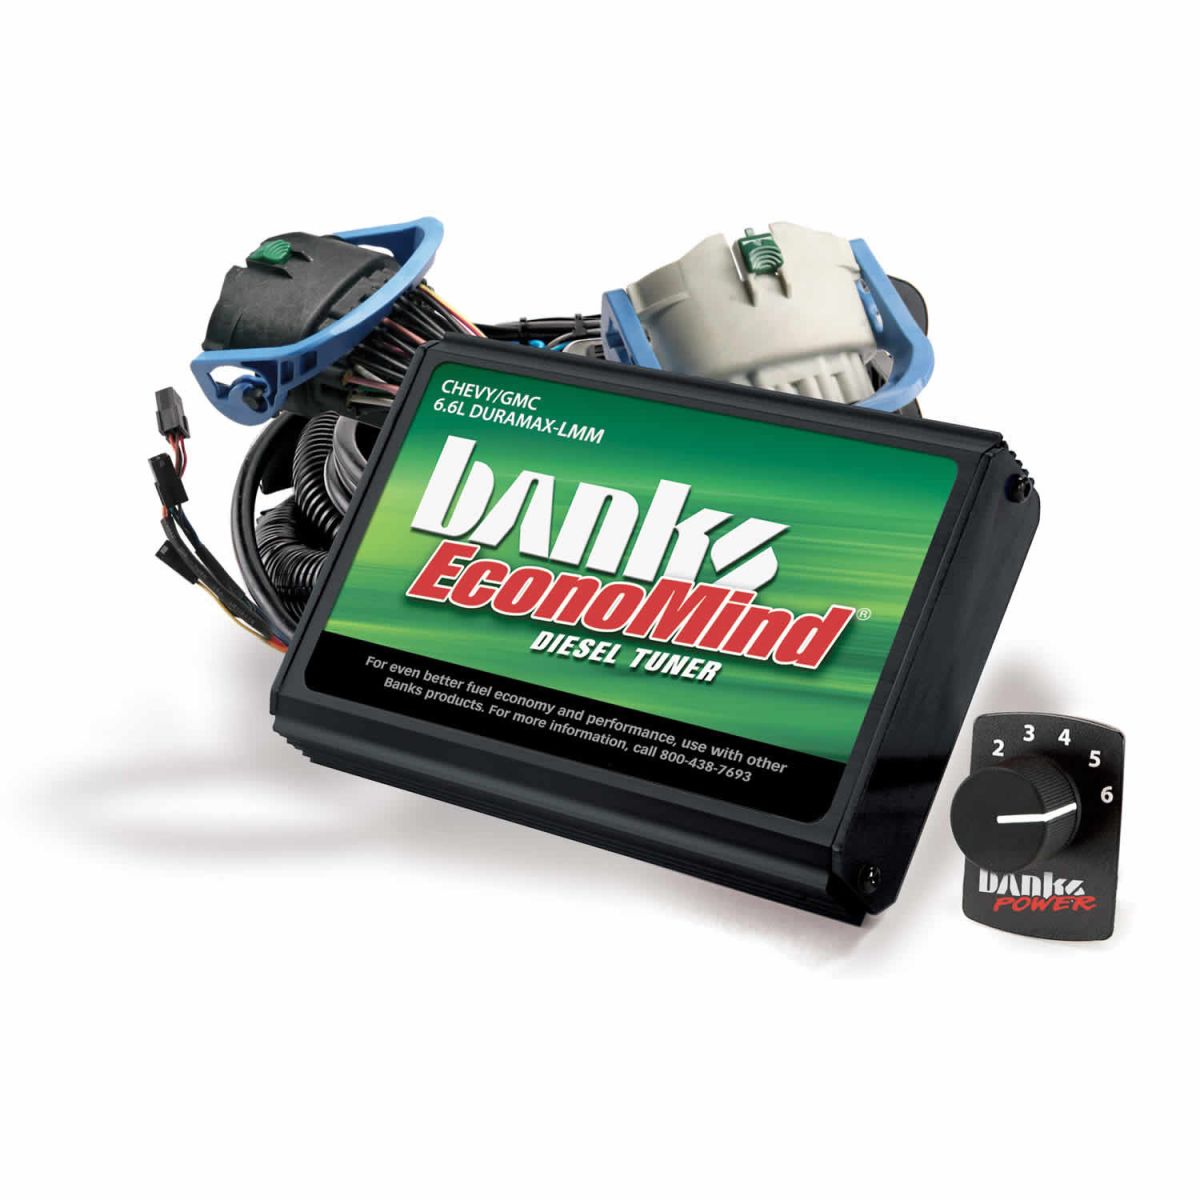 Banks Power - Banks Power Economind Diesel Tuner (PowerPack Calibration) W/Switch 07-10 Chevy 6.6L LMM